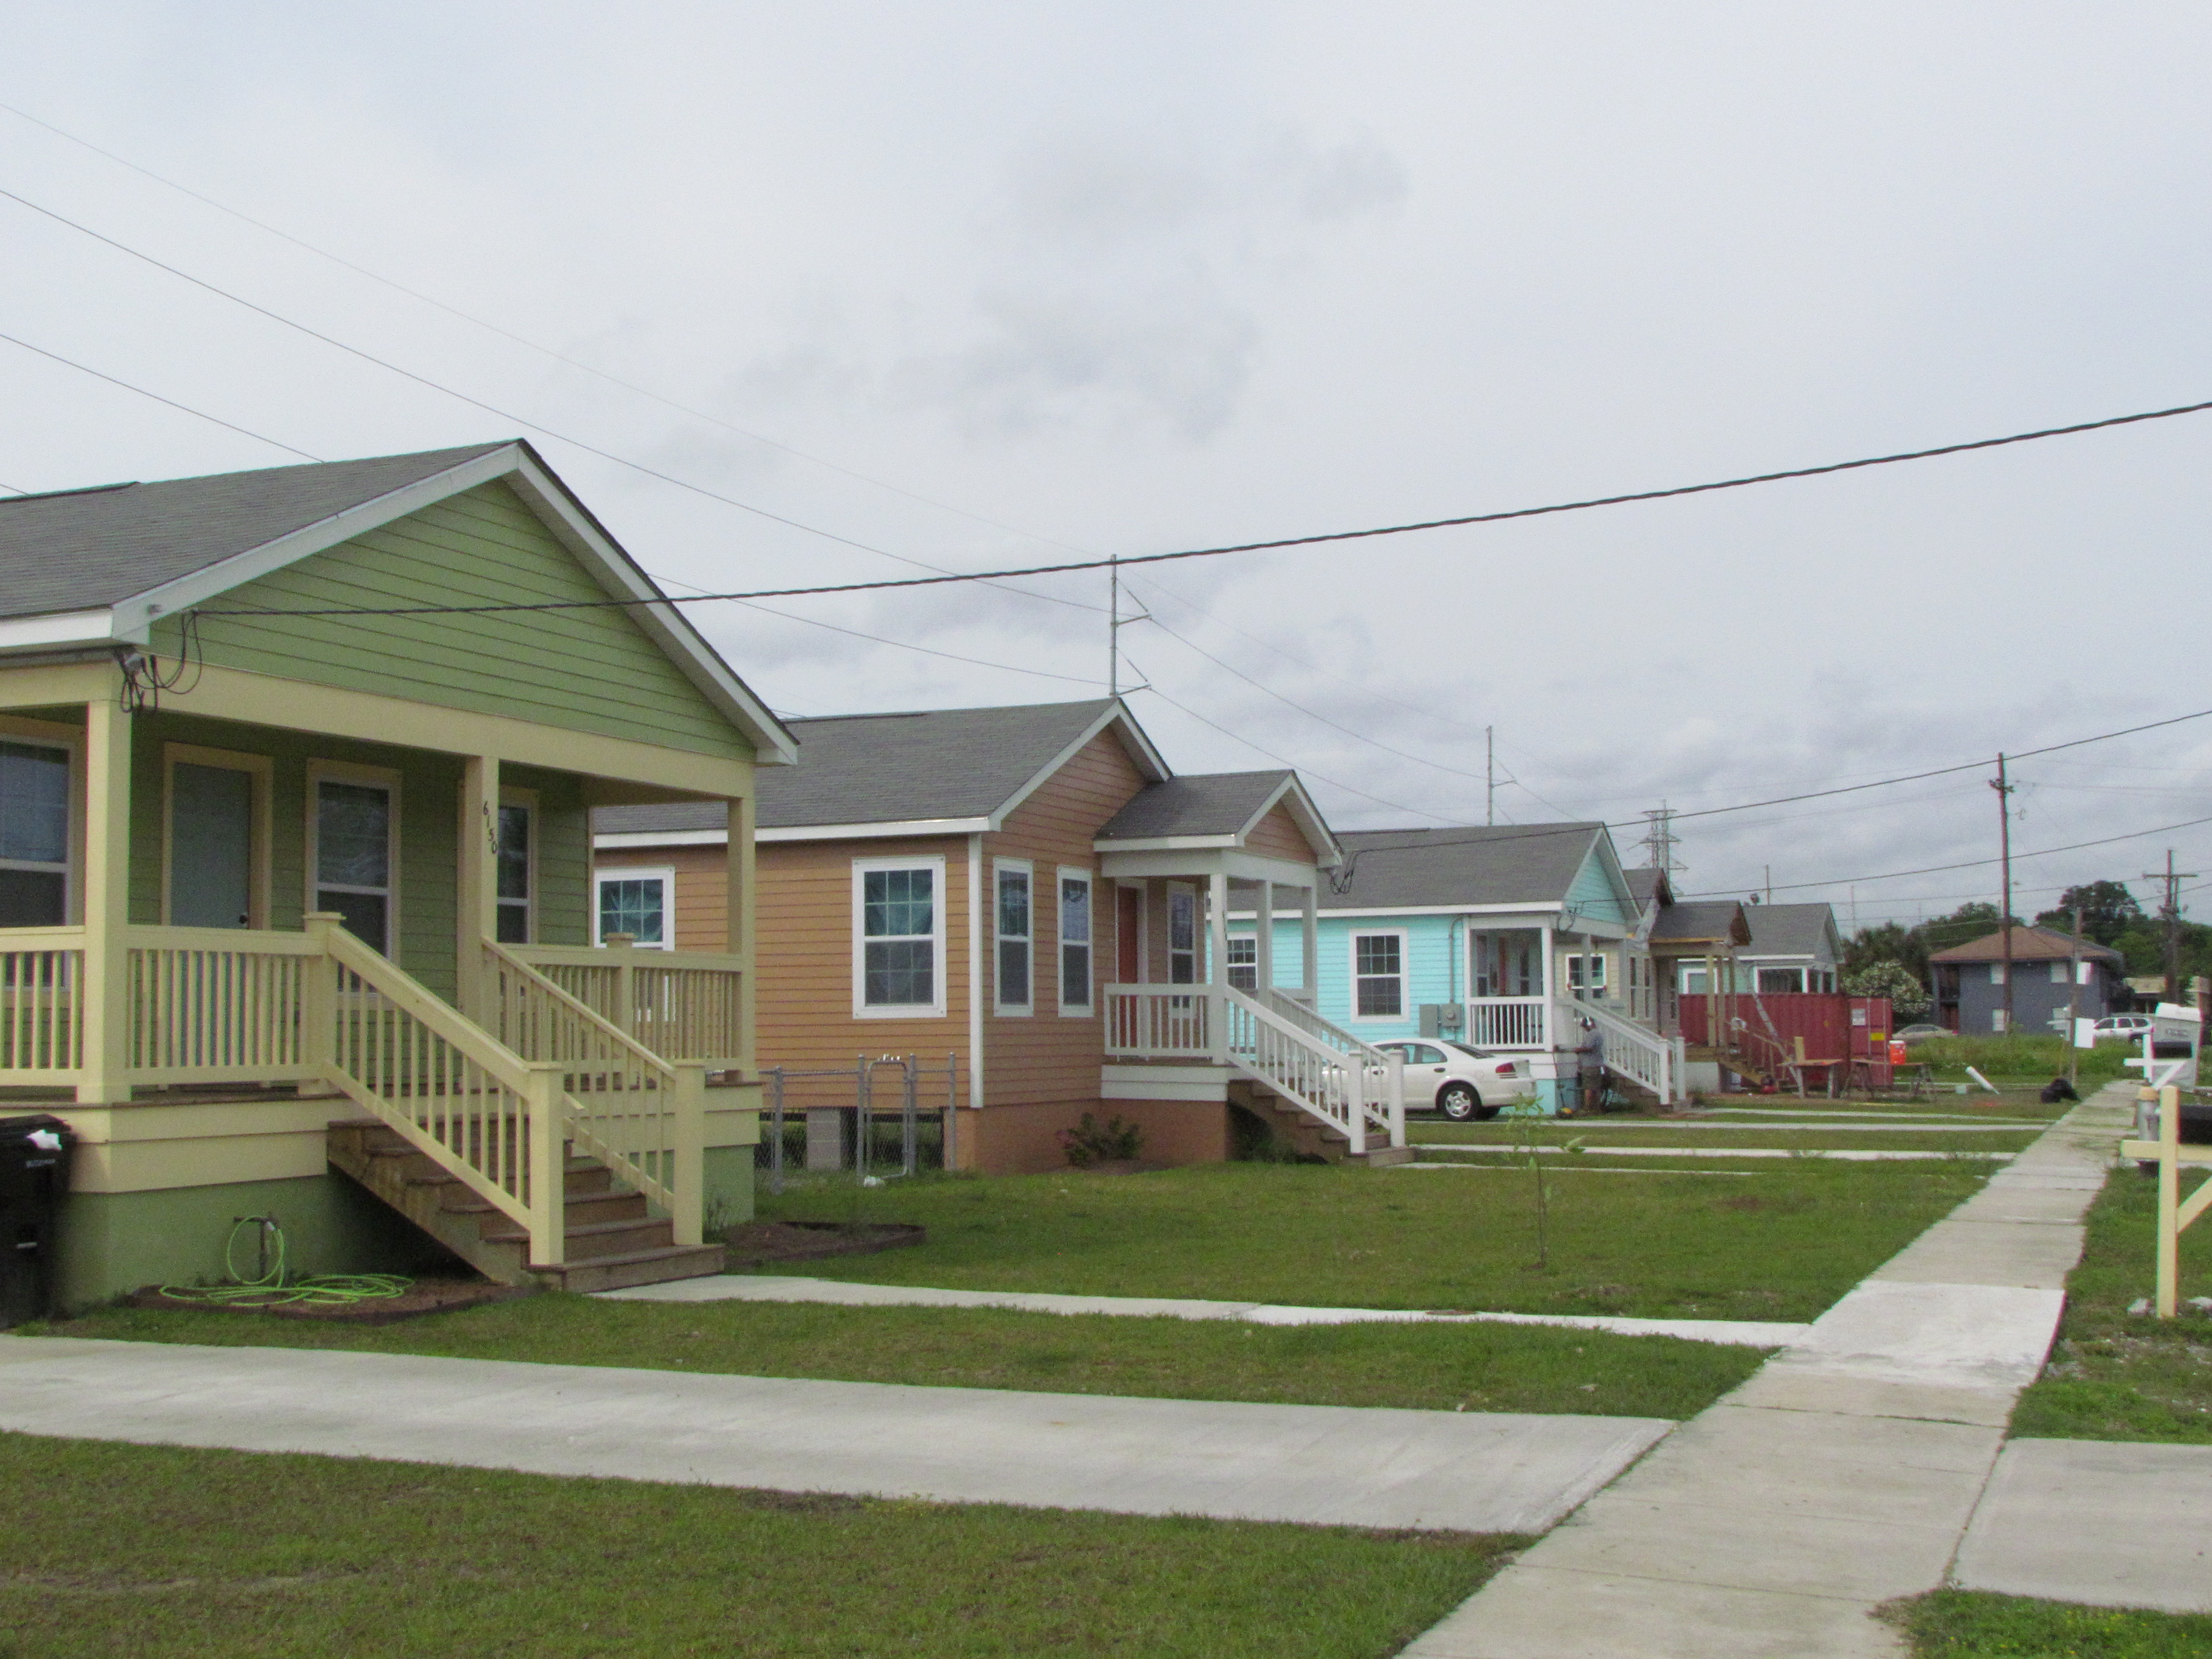 A colorful row of Habitat homes on S. Hermes.